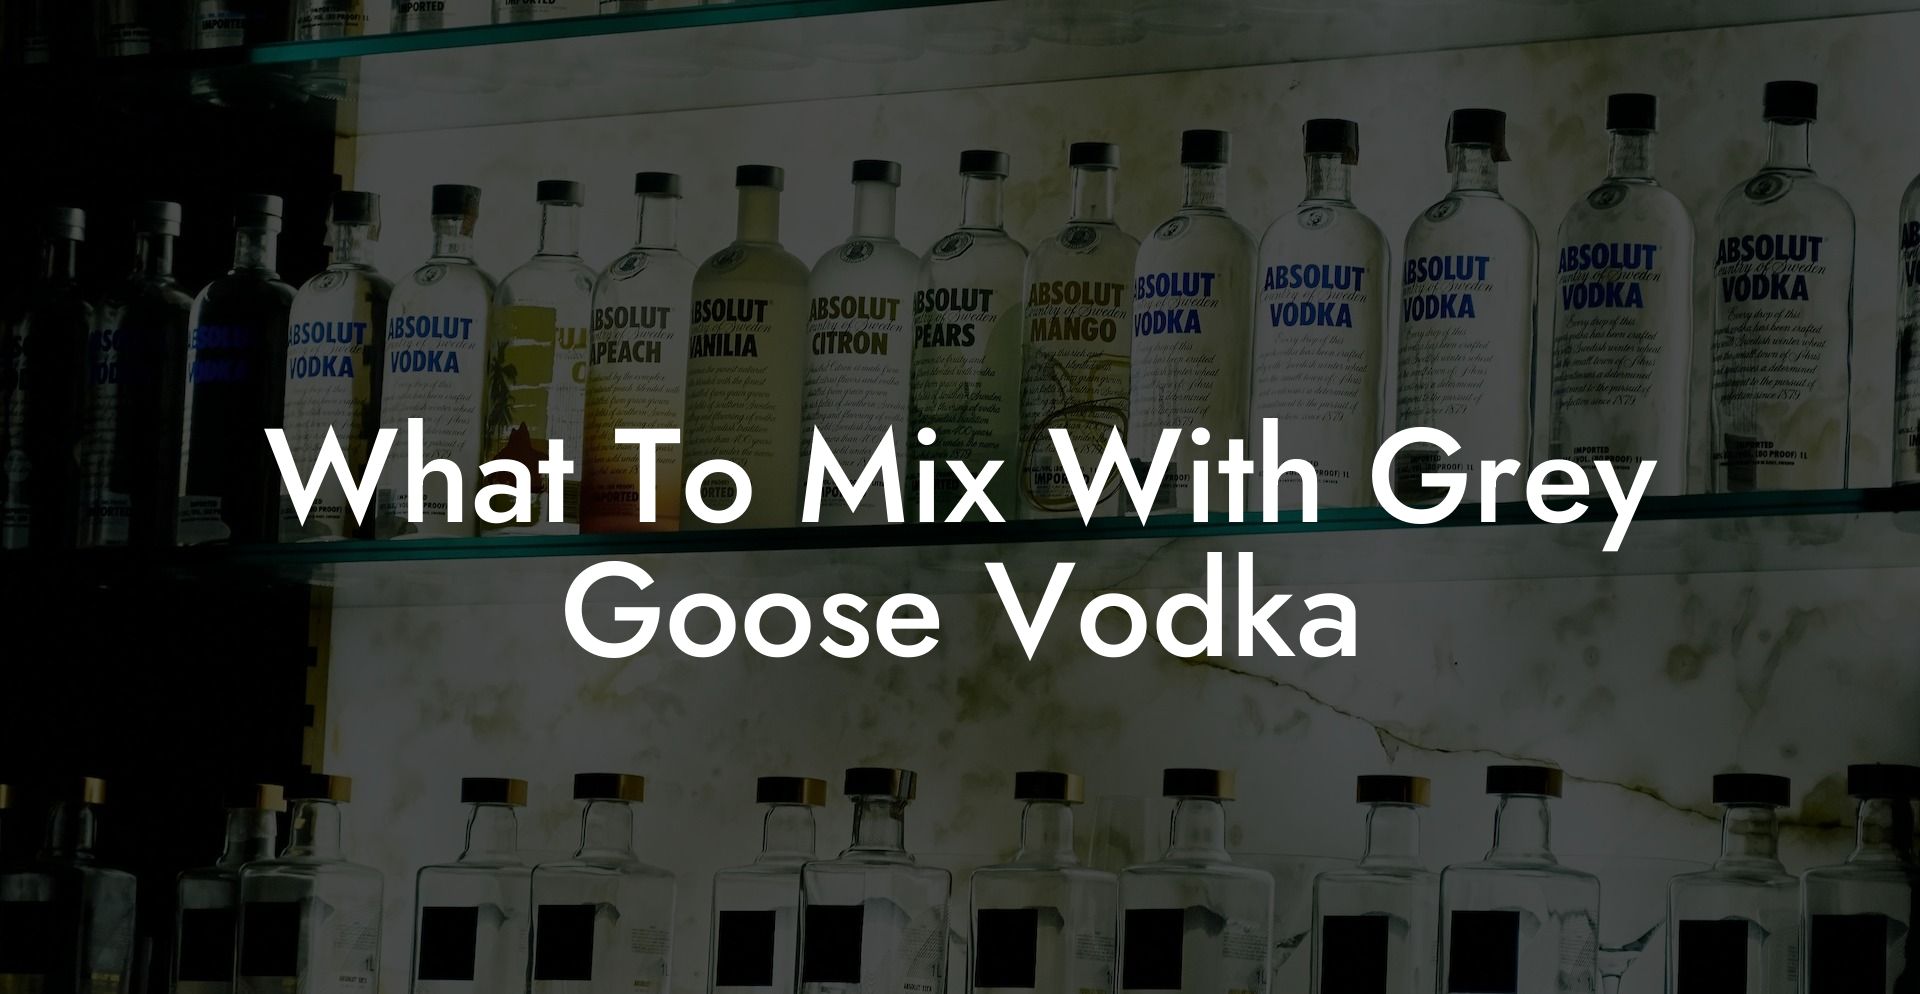 What To Mix With Grey Goose Vodka